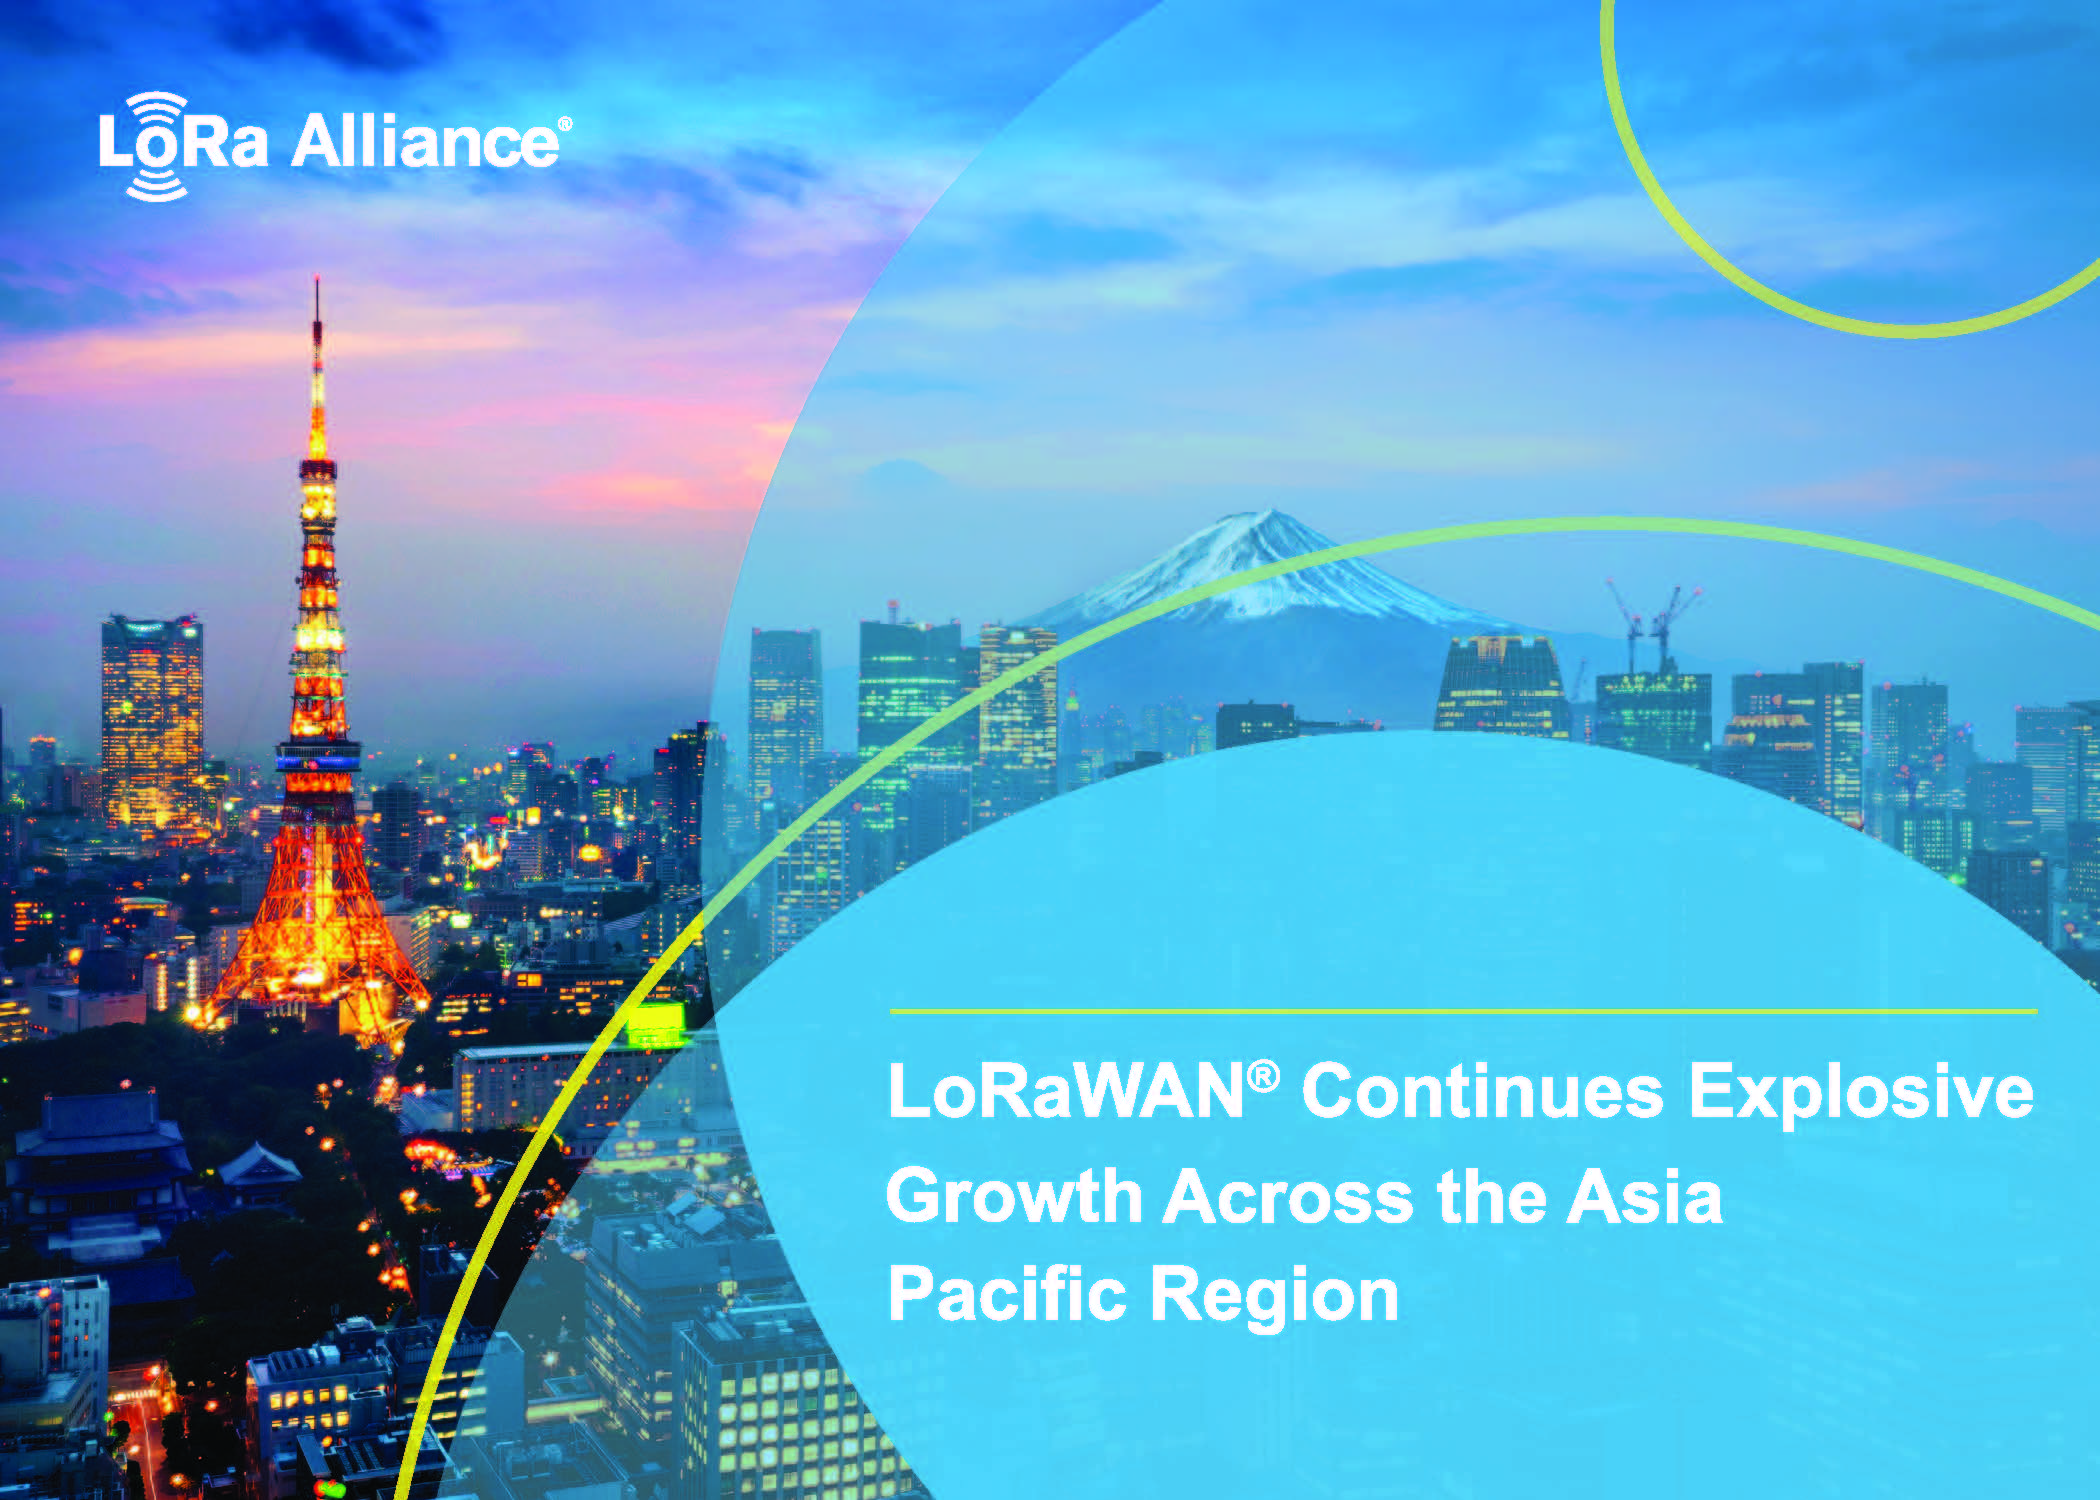 LoRa Alliance Asia Growth and Deployment Image